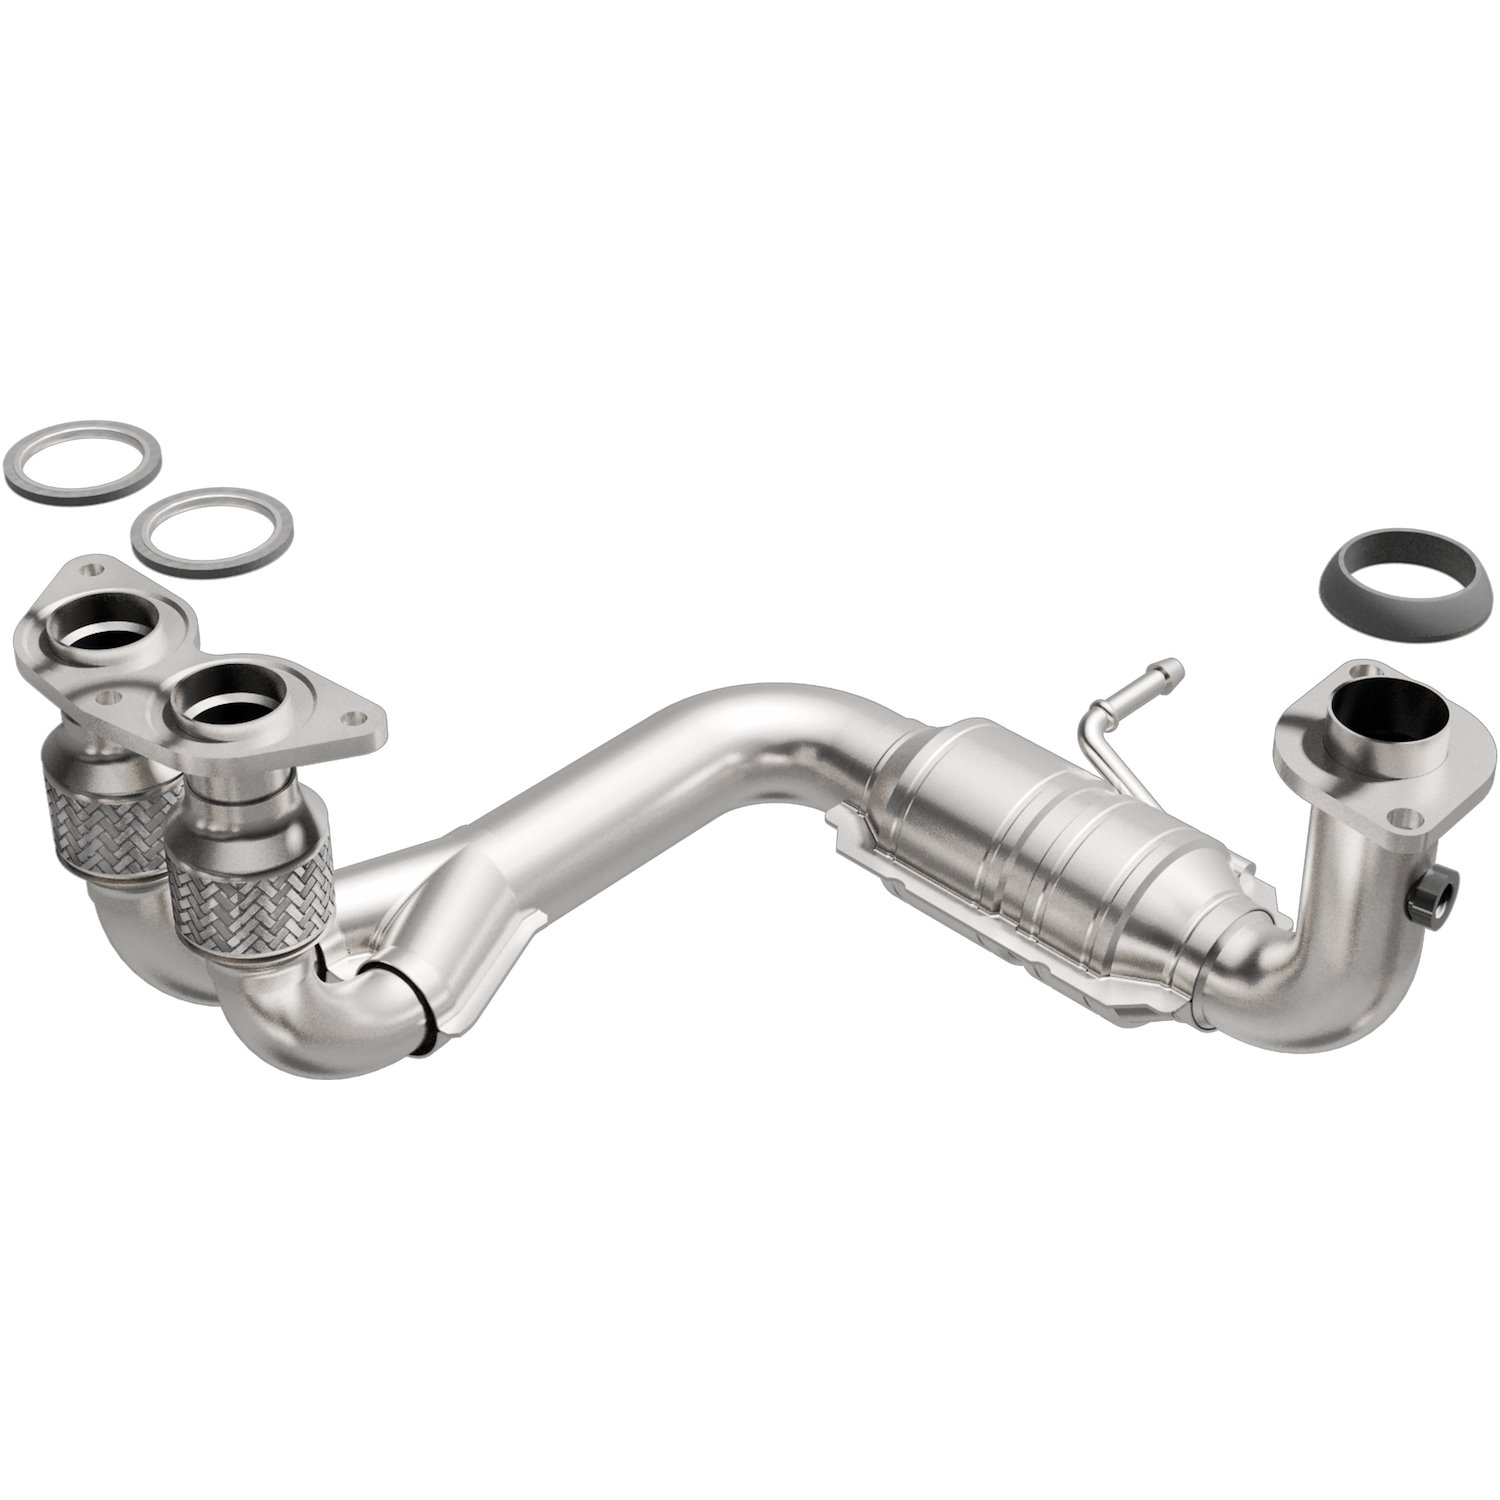 2002-2003 Toyota MR2 Spyder California Grade CARB Compliant Direct-Fit Catalytic Converter